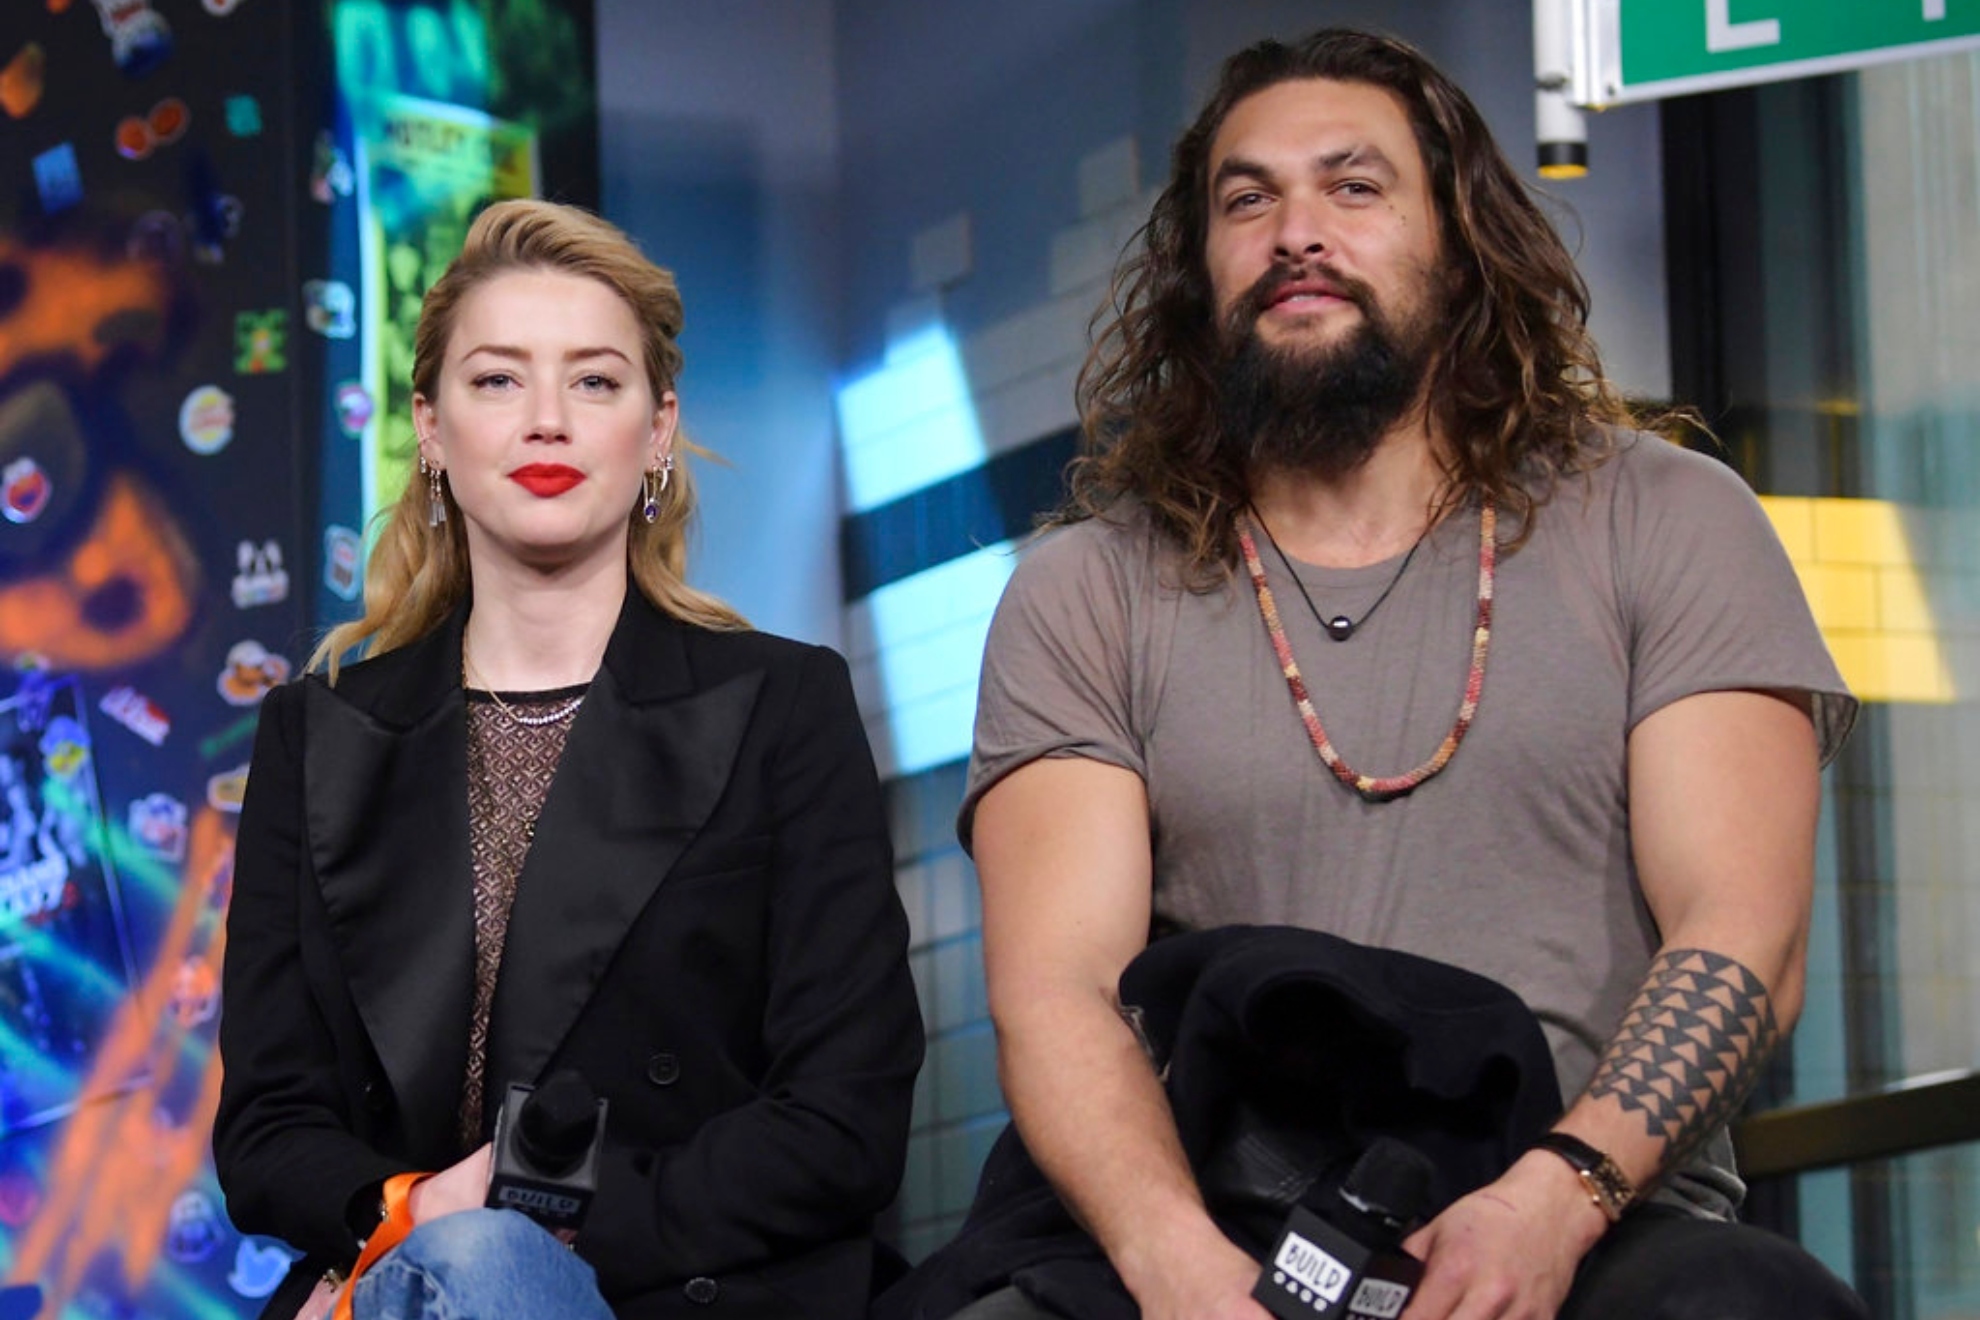 Jason Momoa suspected of 'tormenting' Amber Heard by dressing up as Johnny Depp